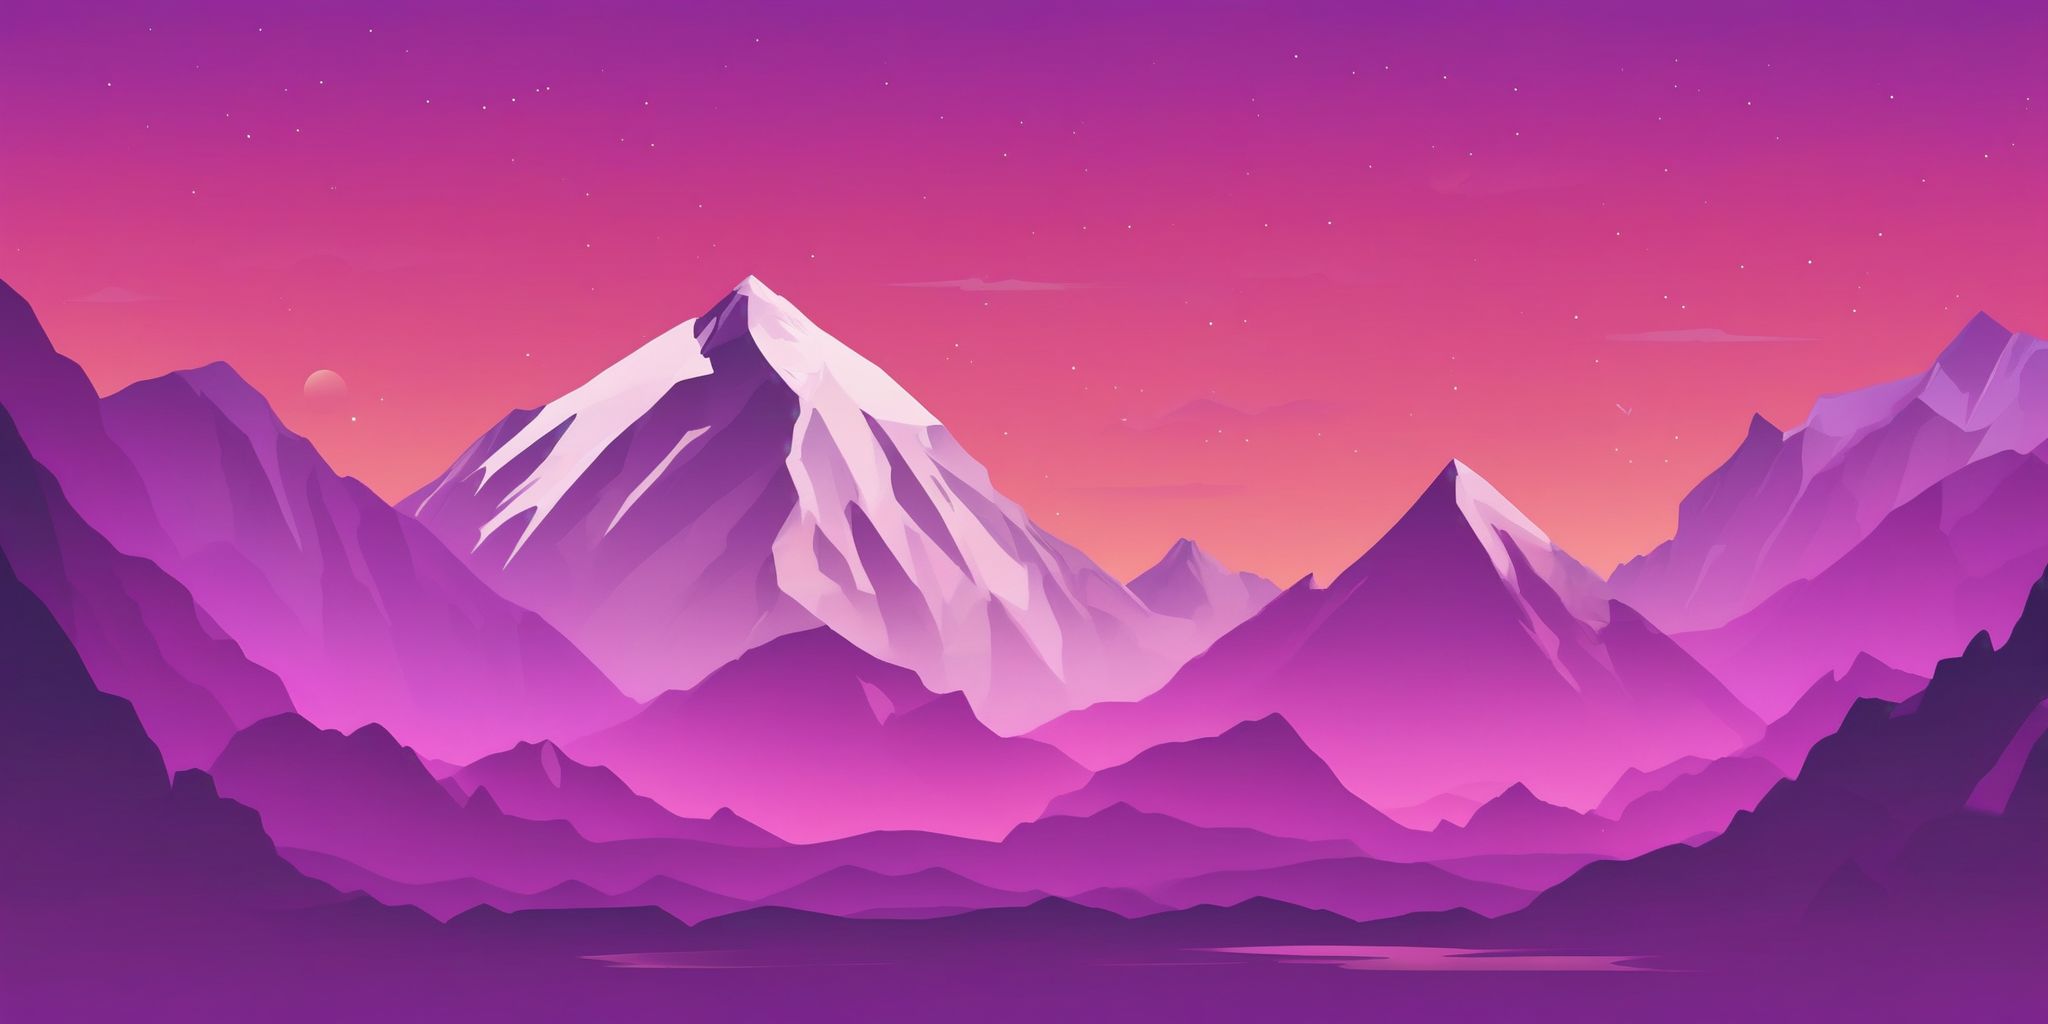 Atlas in flat illustration style, colorful purple gradient colors